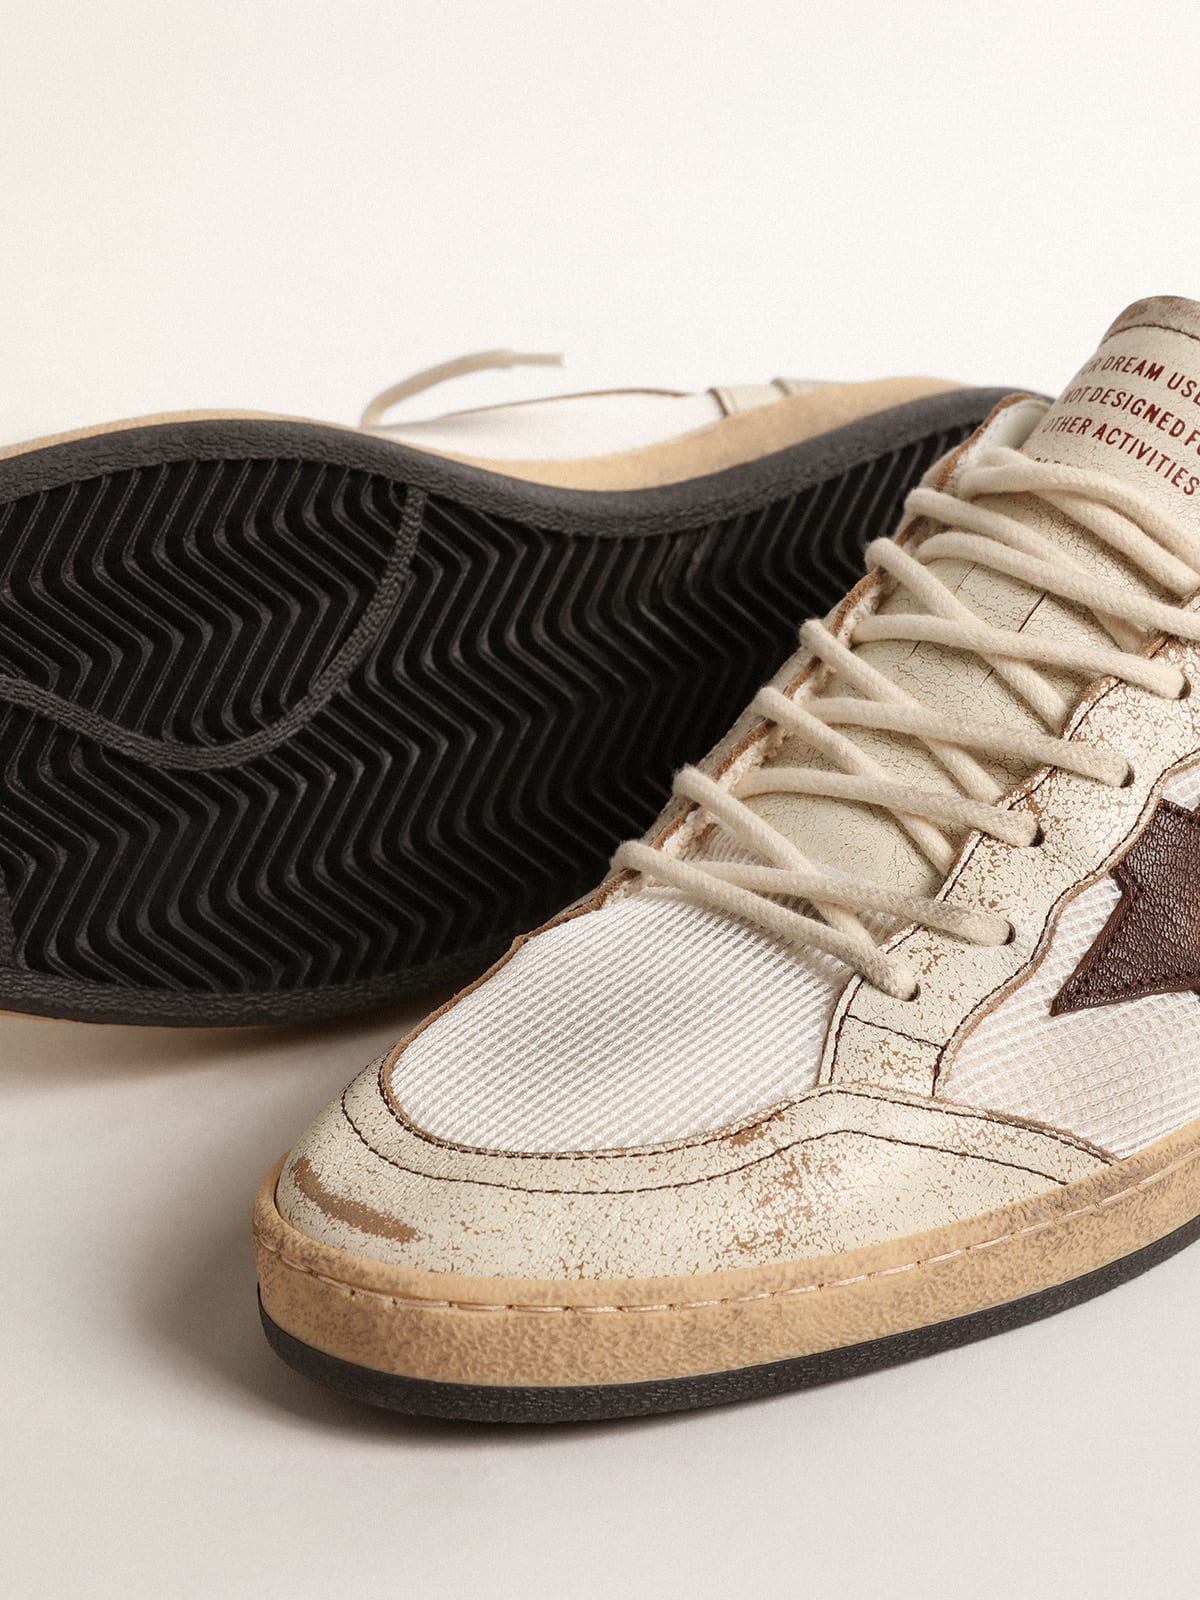 Golden Goose - Ball Star LTD in ecru leather and white mesh with brown star in 